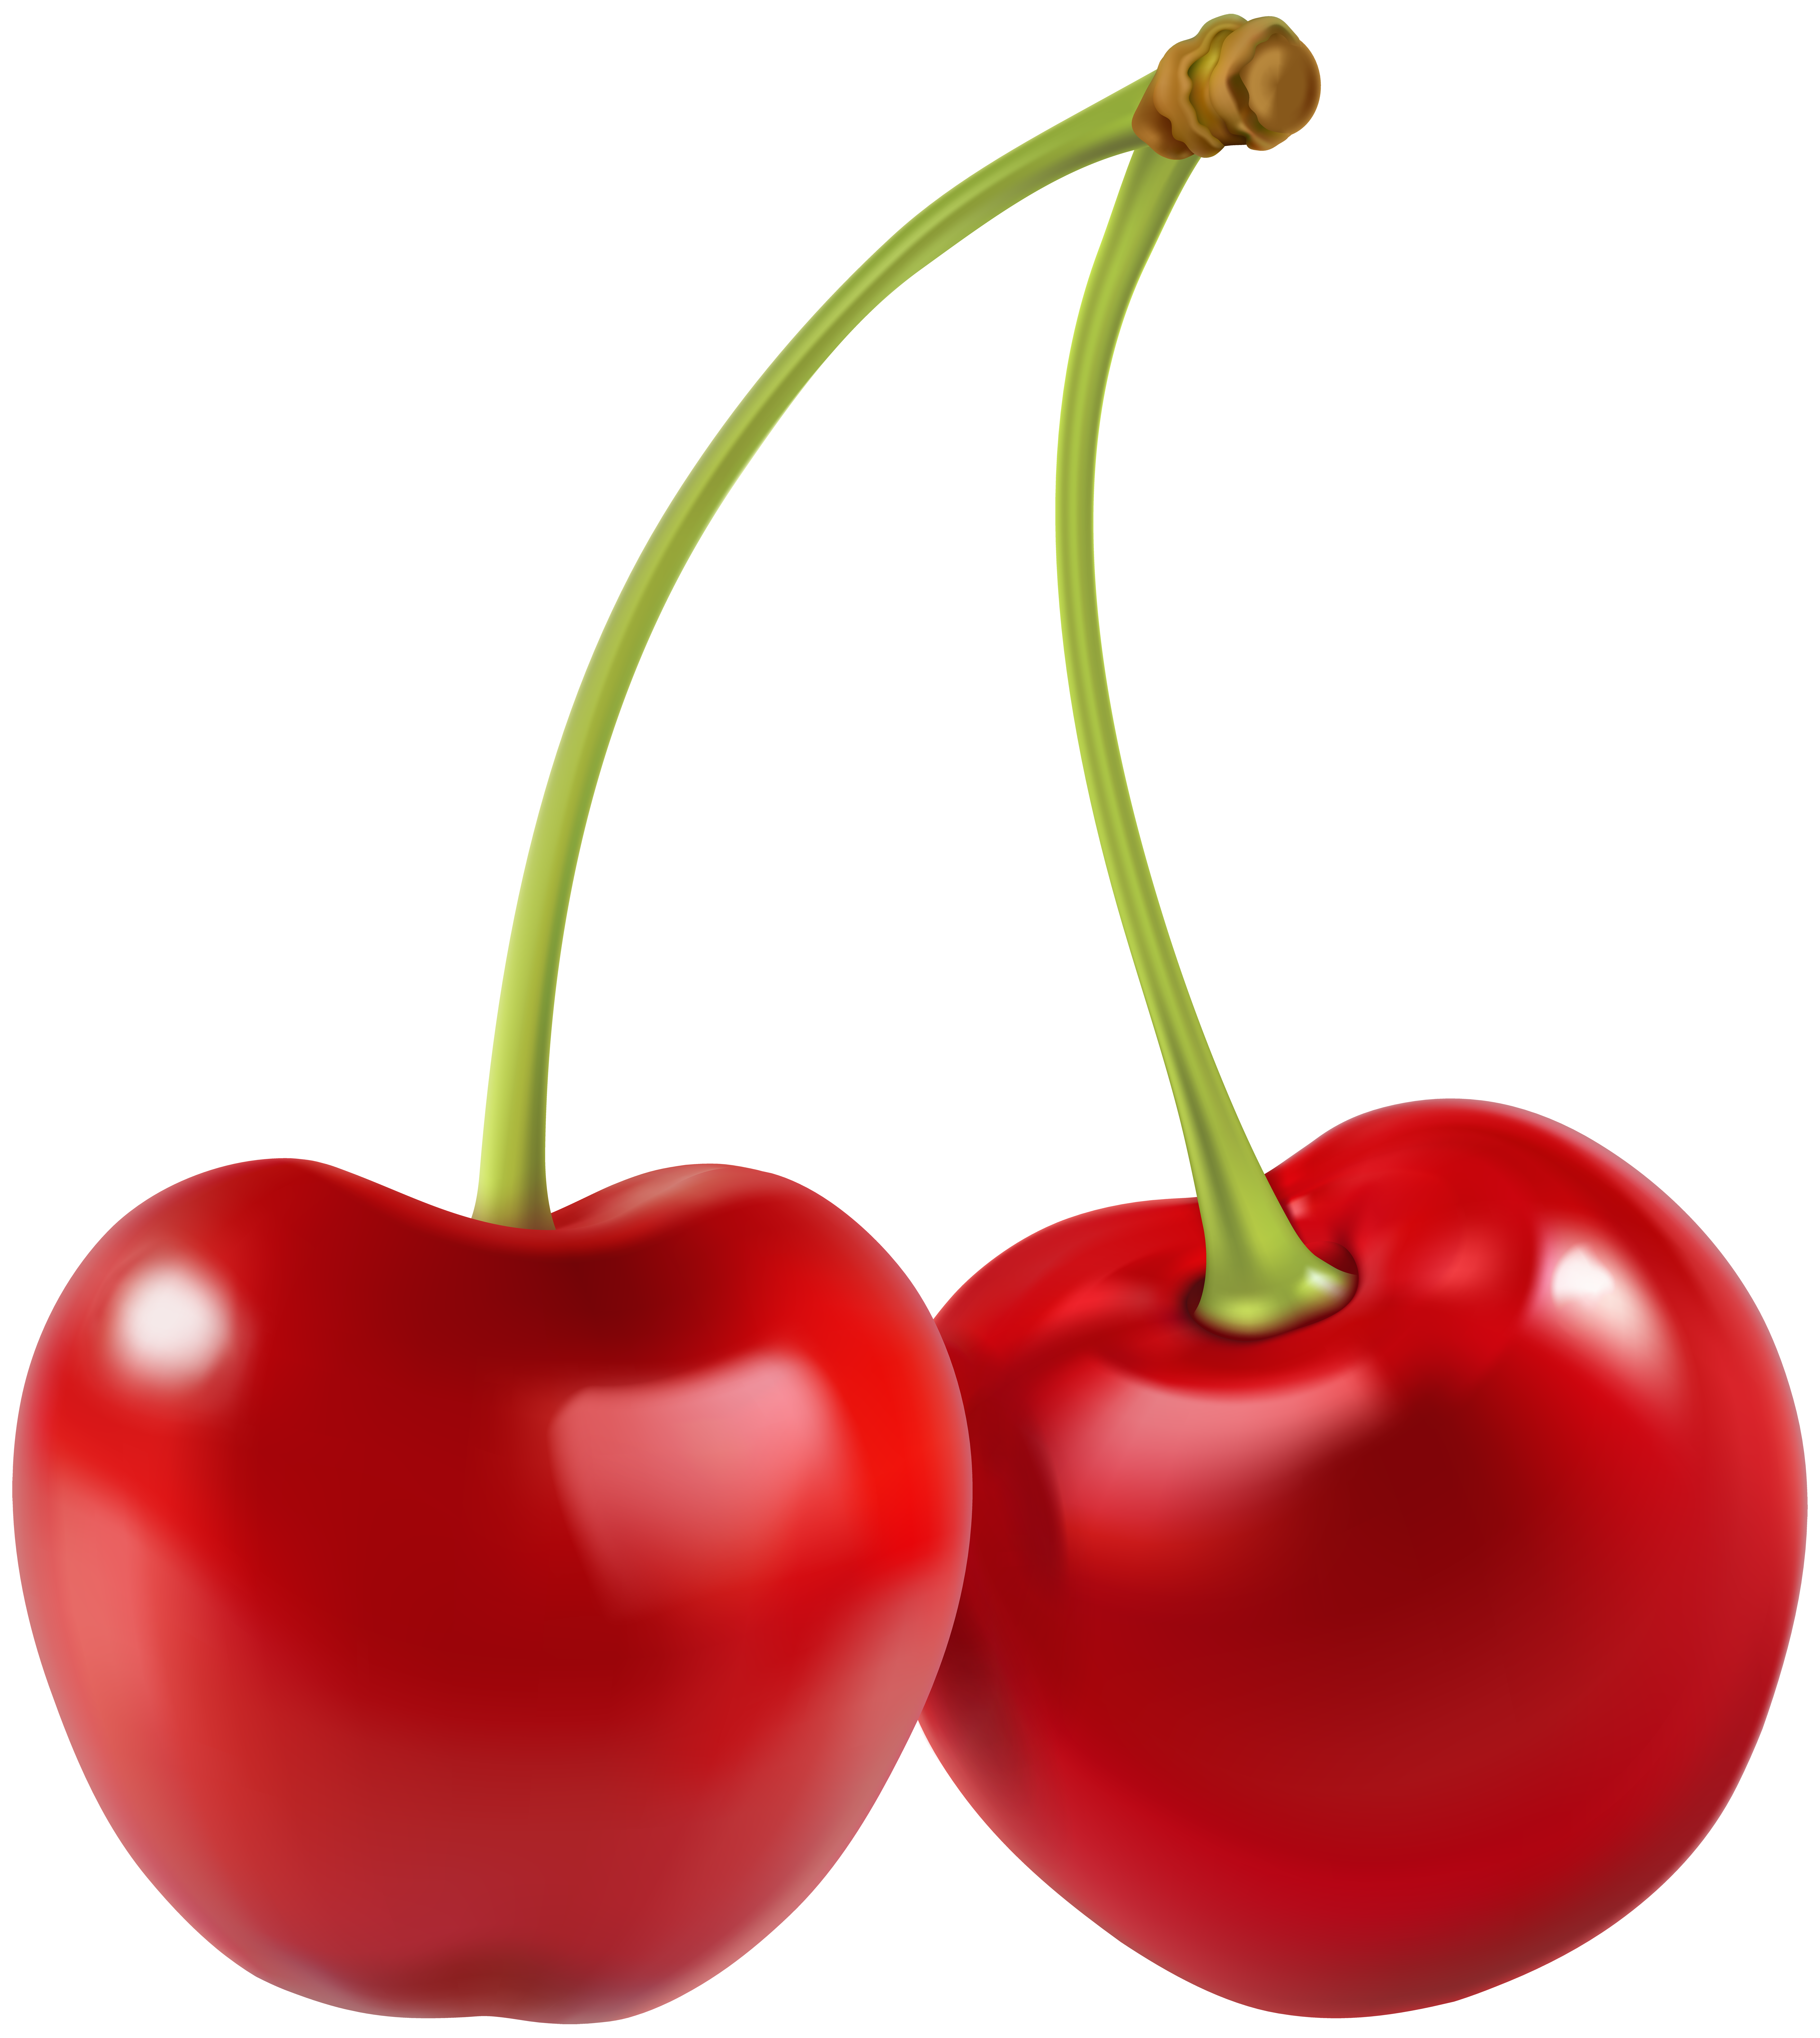 Two Cherries PNG Clip Art Image